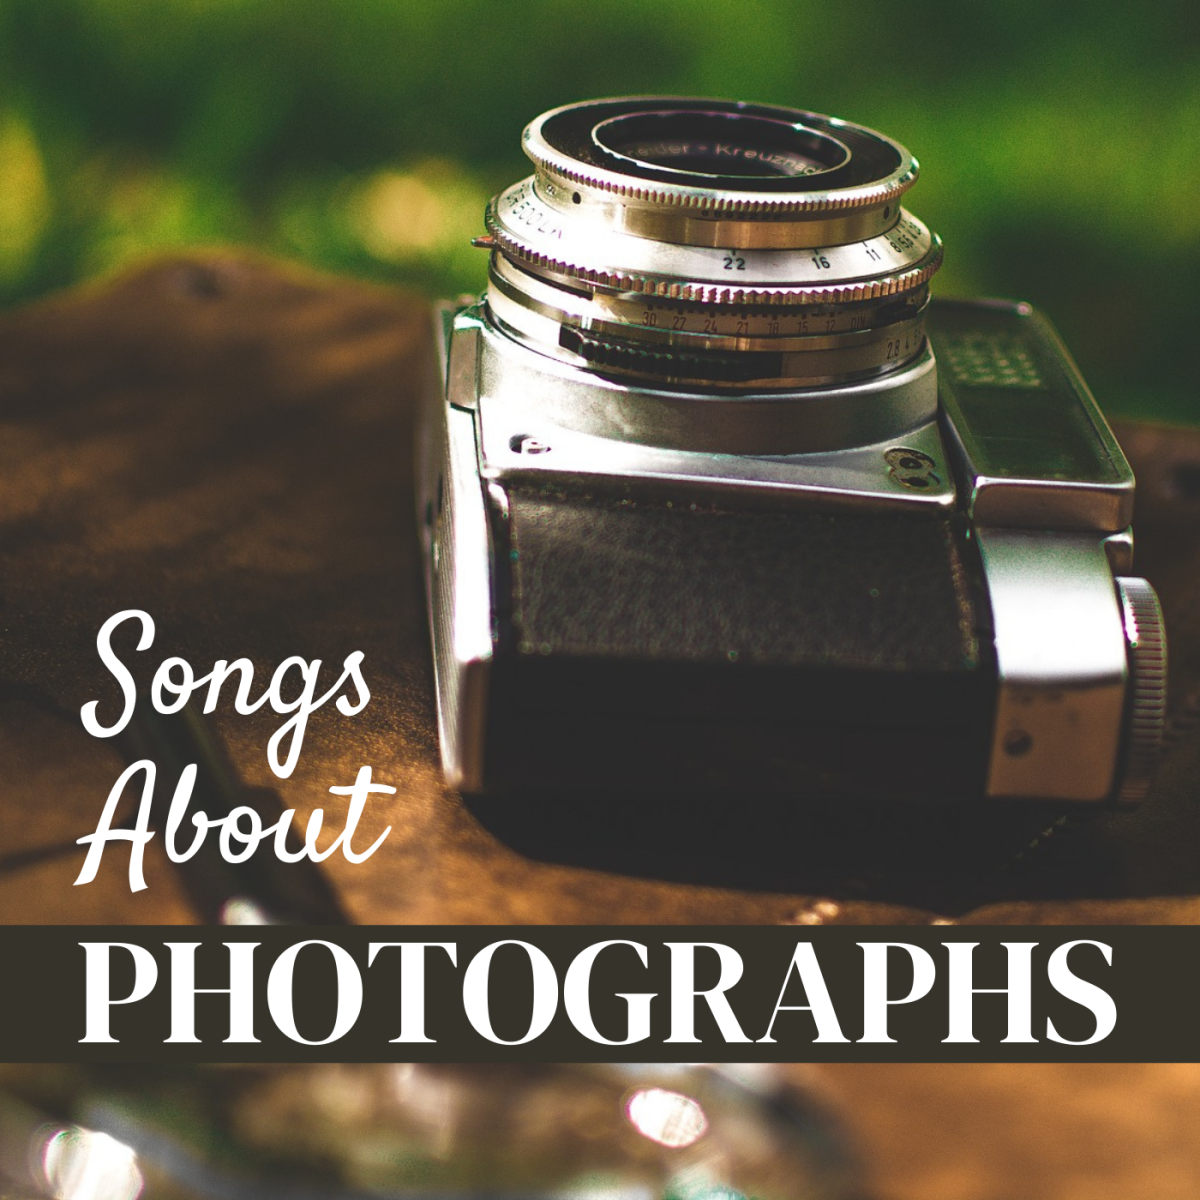 57 Songs About Photographs